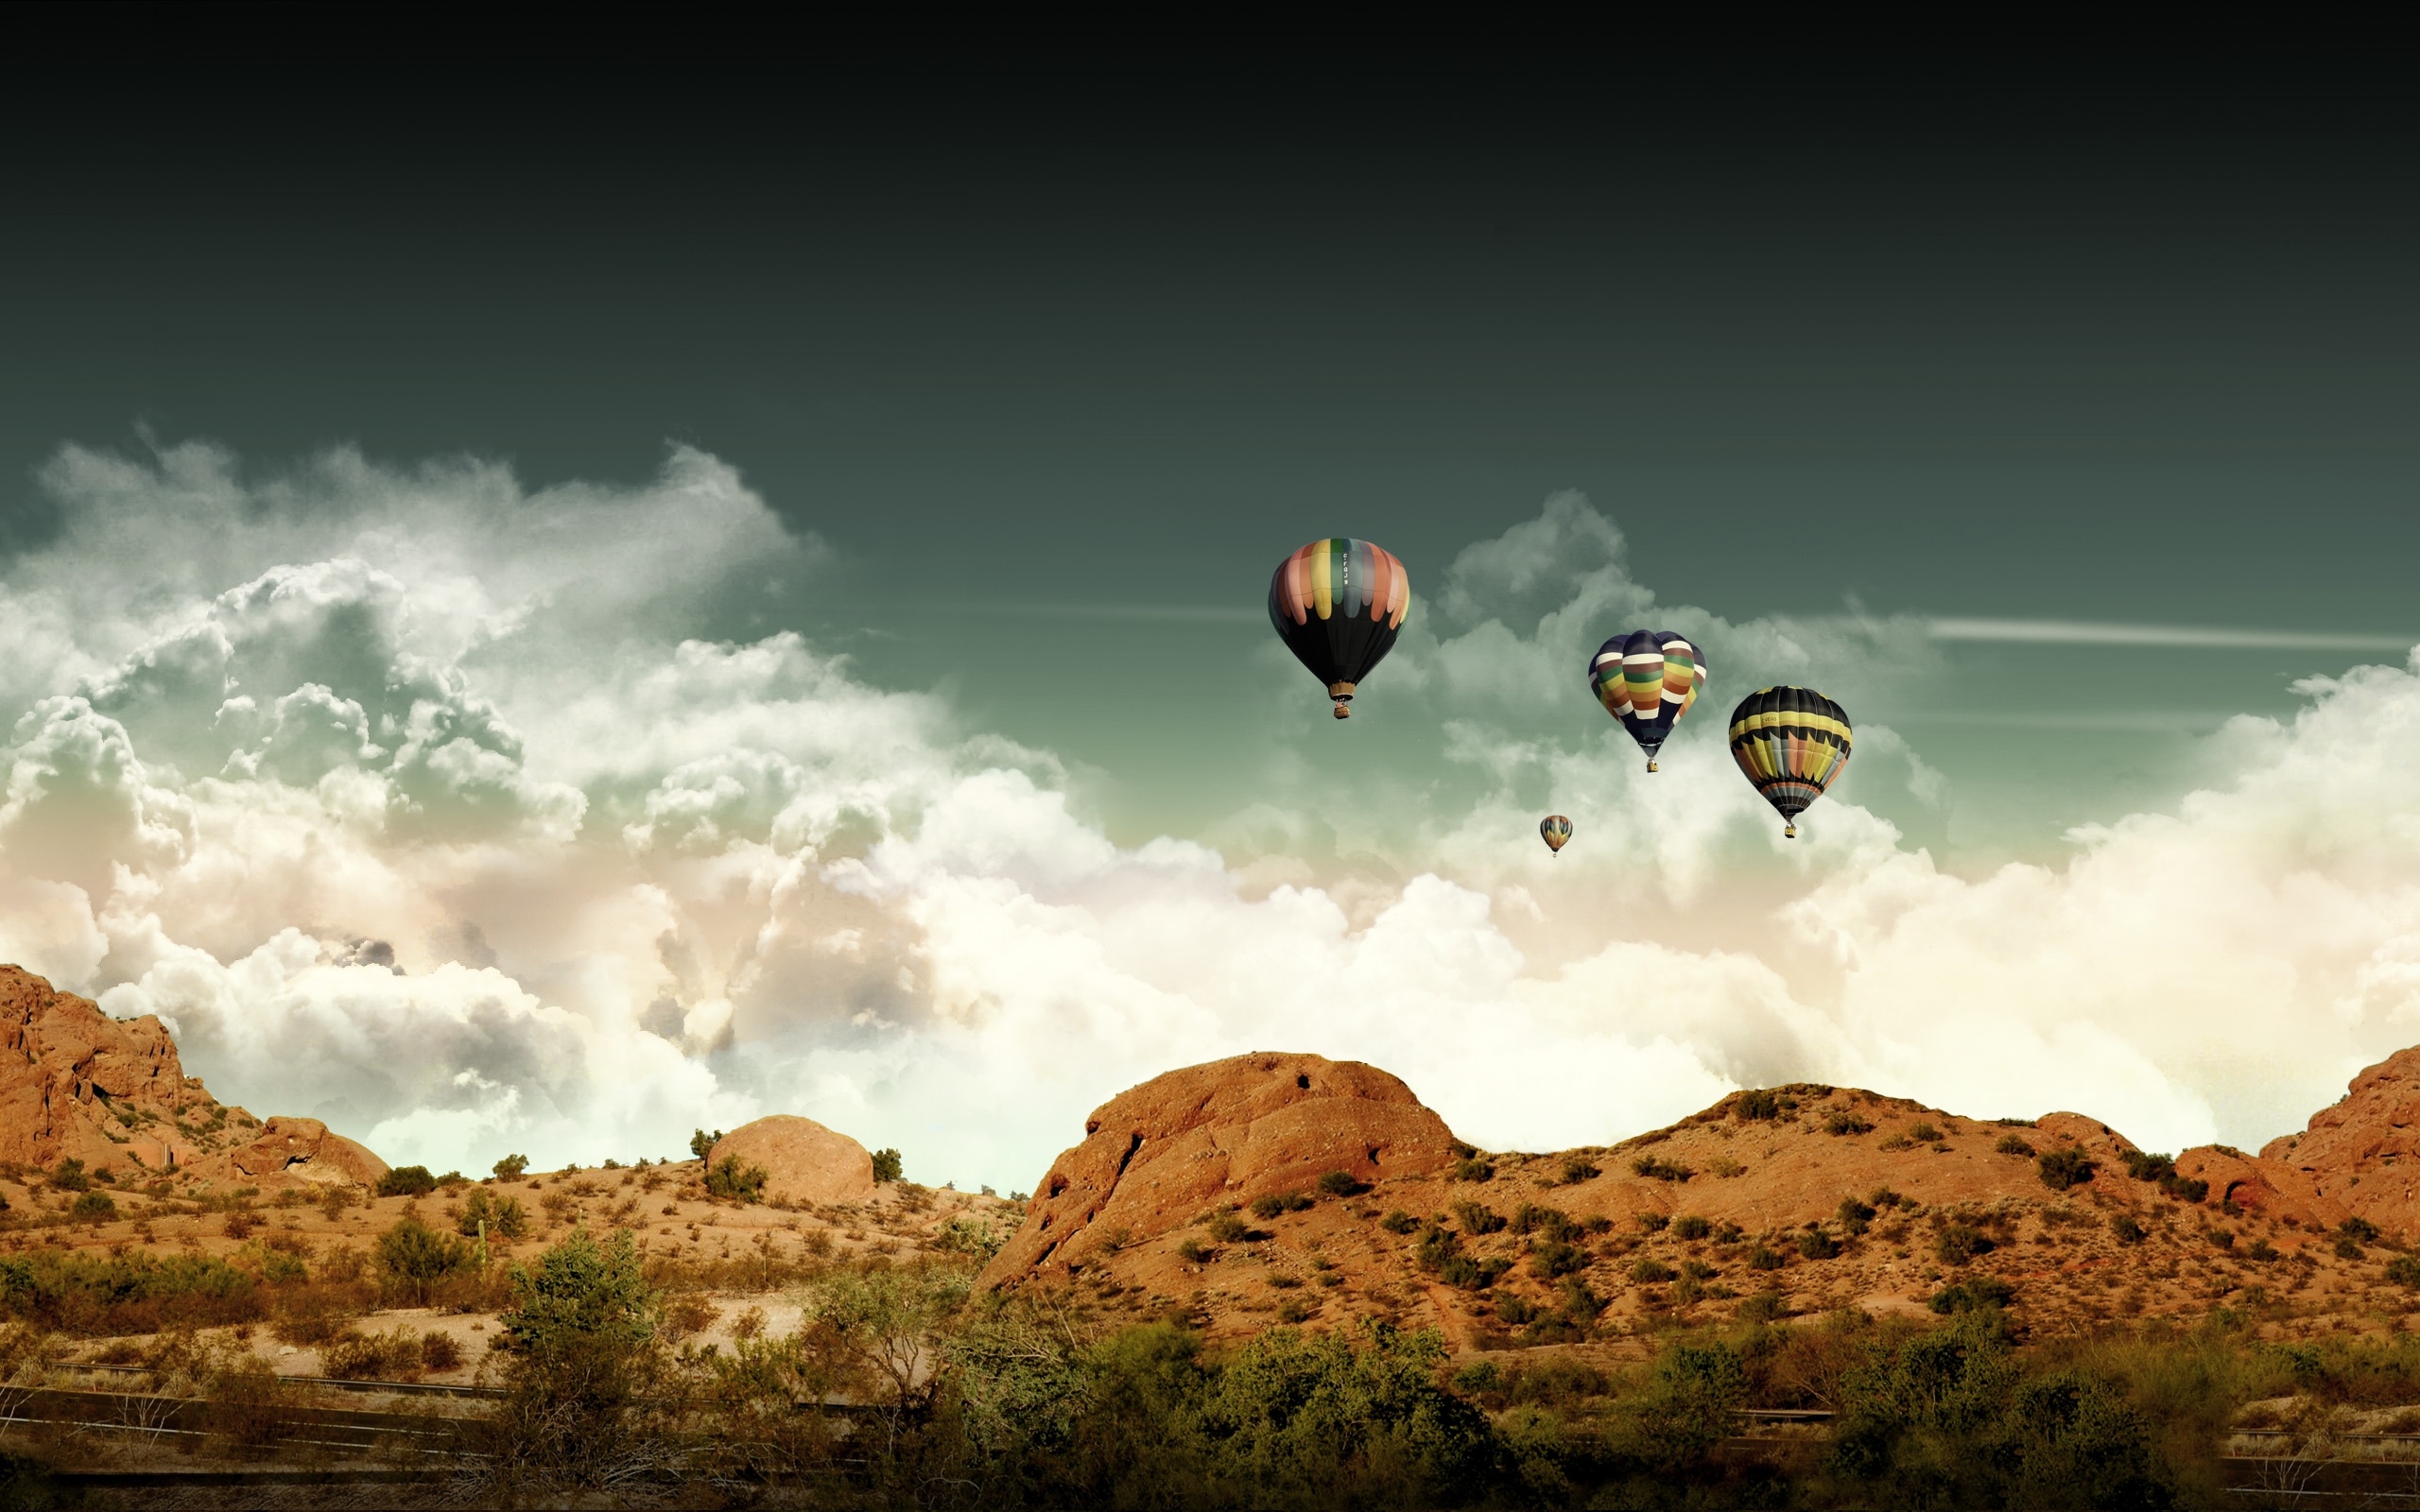 Air Sports: Floating Vehicles drifting over the mountain range in clouds, Aerostatic balloons. 2560x1600 HD Wallpaper.